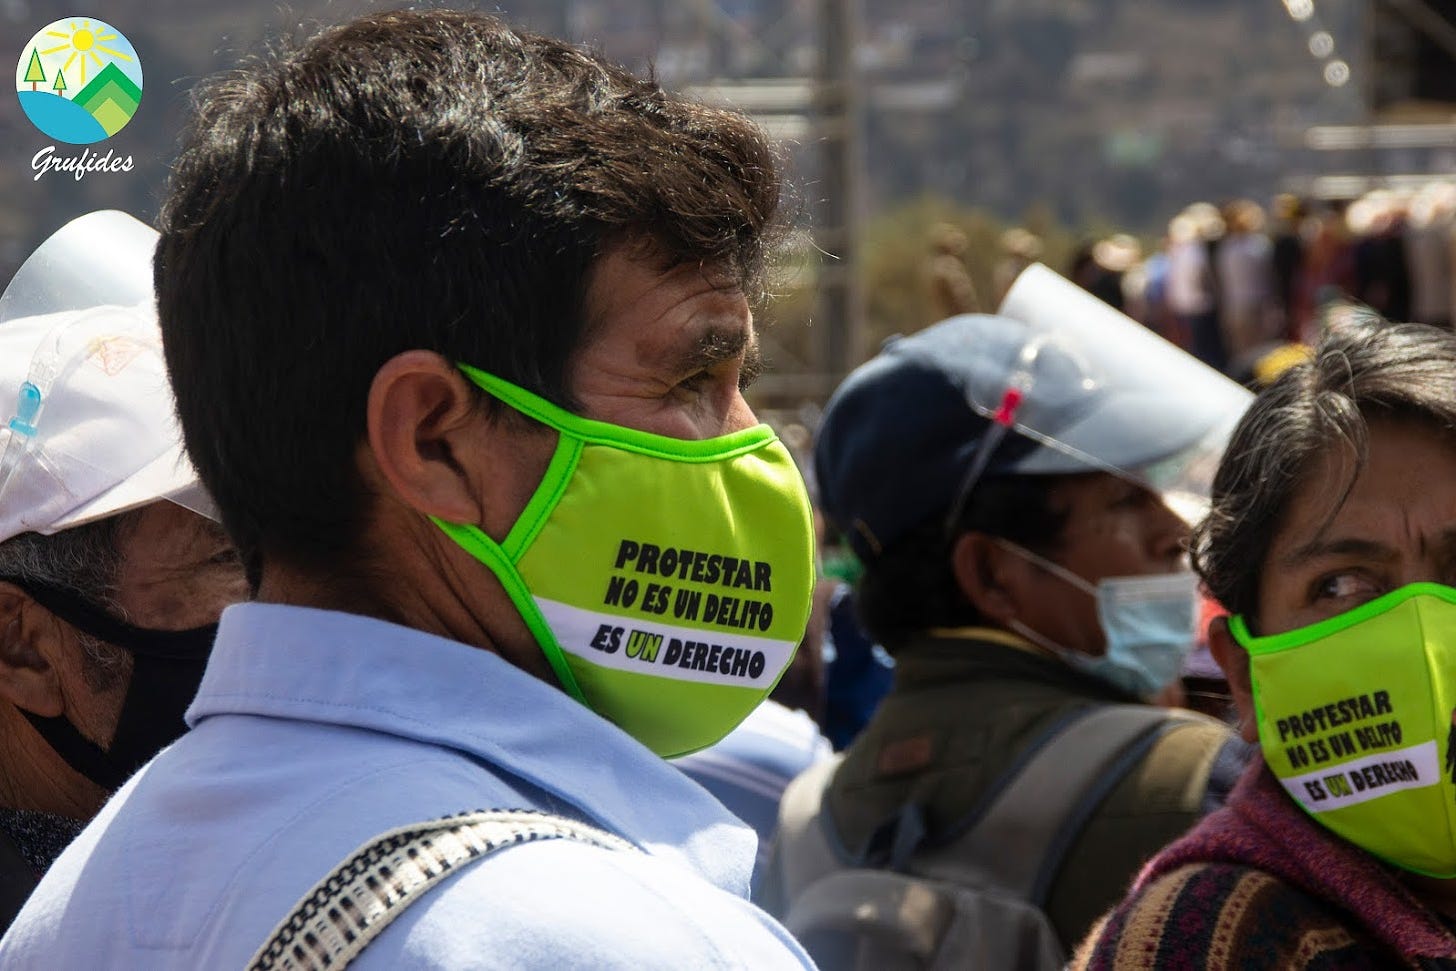 Rosas, a middle-aged Peruvian man with short black hair and a white shirt, joins a protest wearing a yellow facemask that says 'Protestar no es un delito es un derecho'